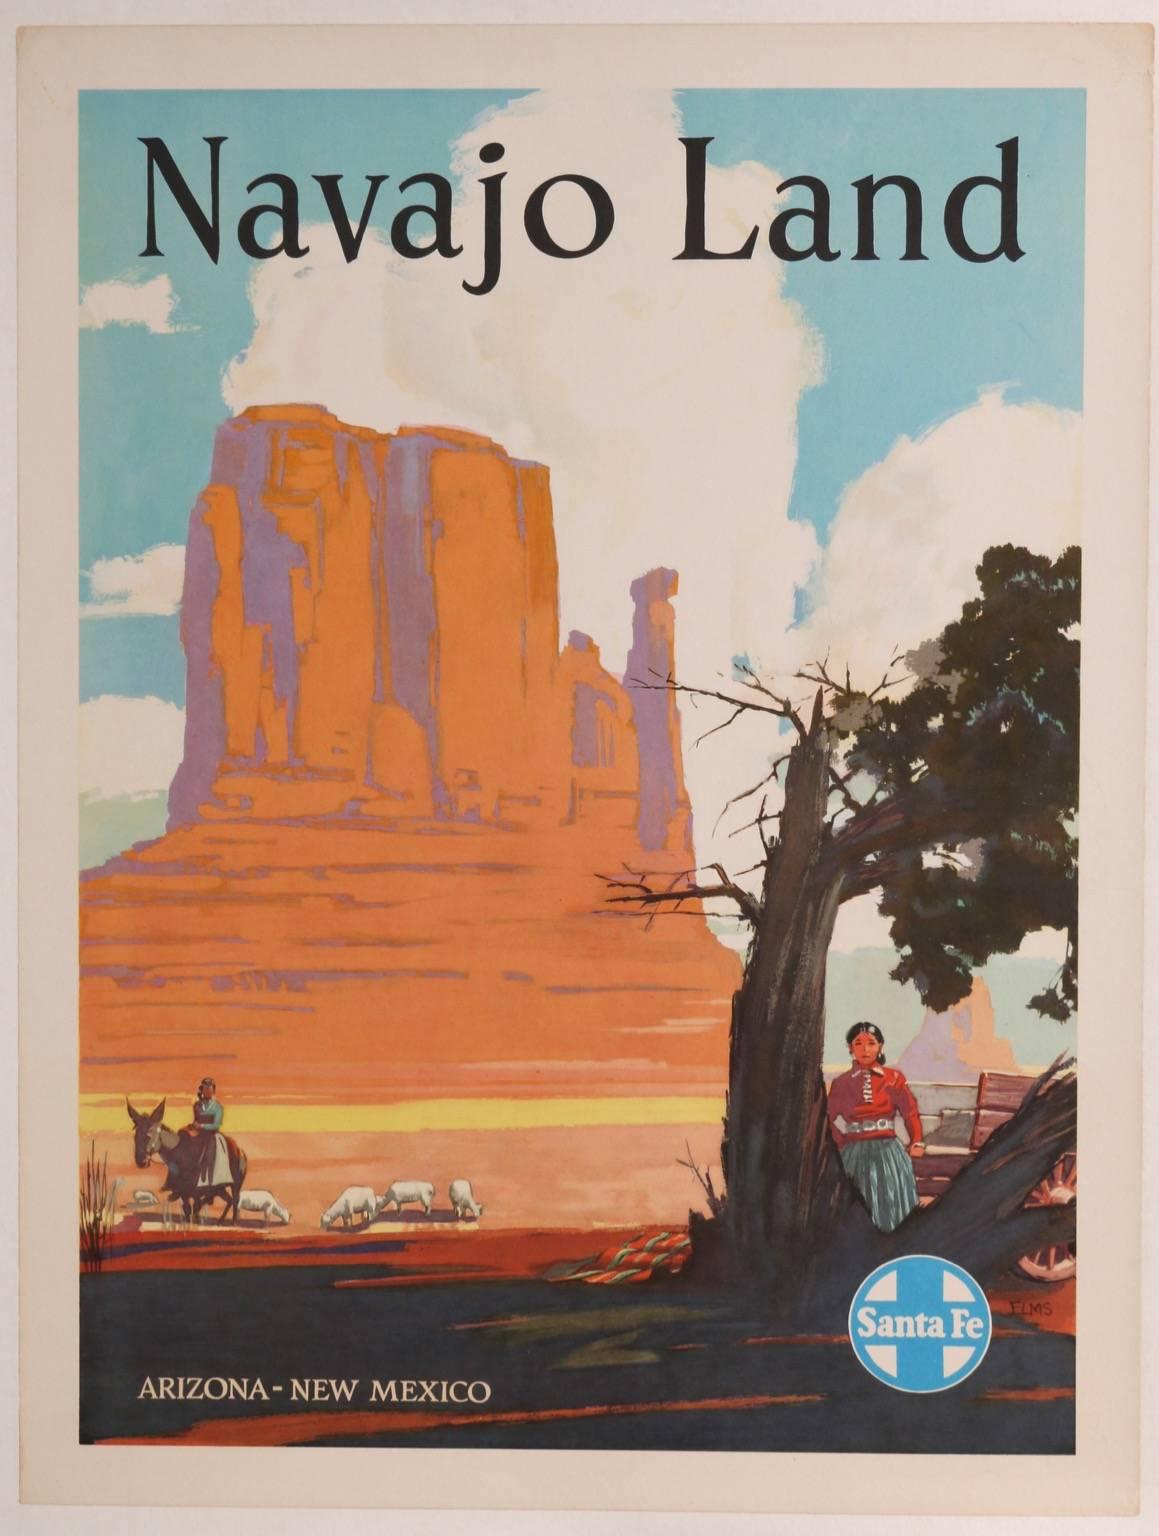 Five original, vintage and vibrant travel posters from the Santa Fe Railway, printed circa 1940 and recently mounted on linen. Produced at the height of train travel and placed in travel agent offices around the world, these posters depicted artists